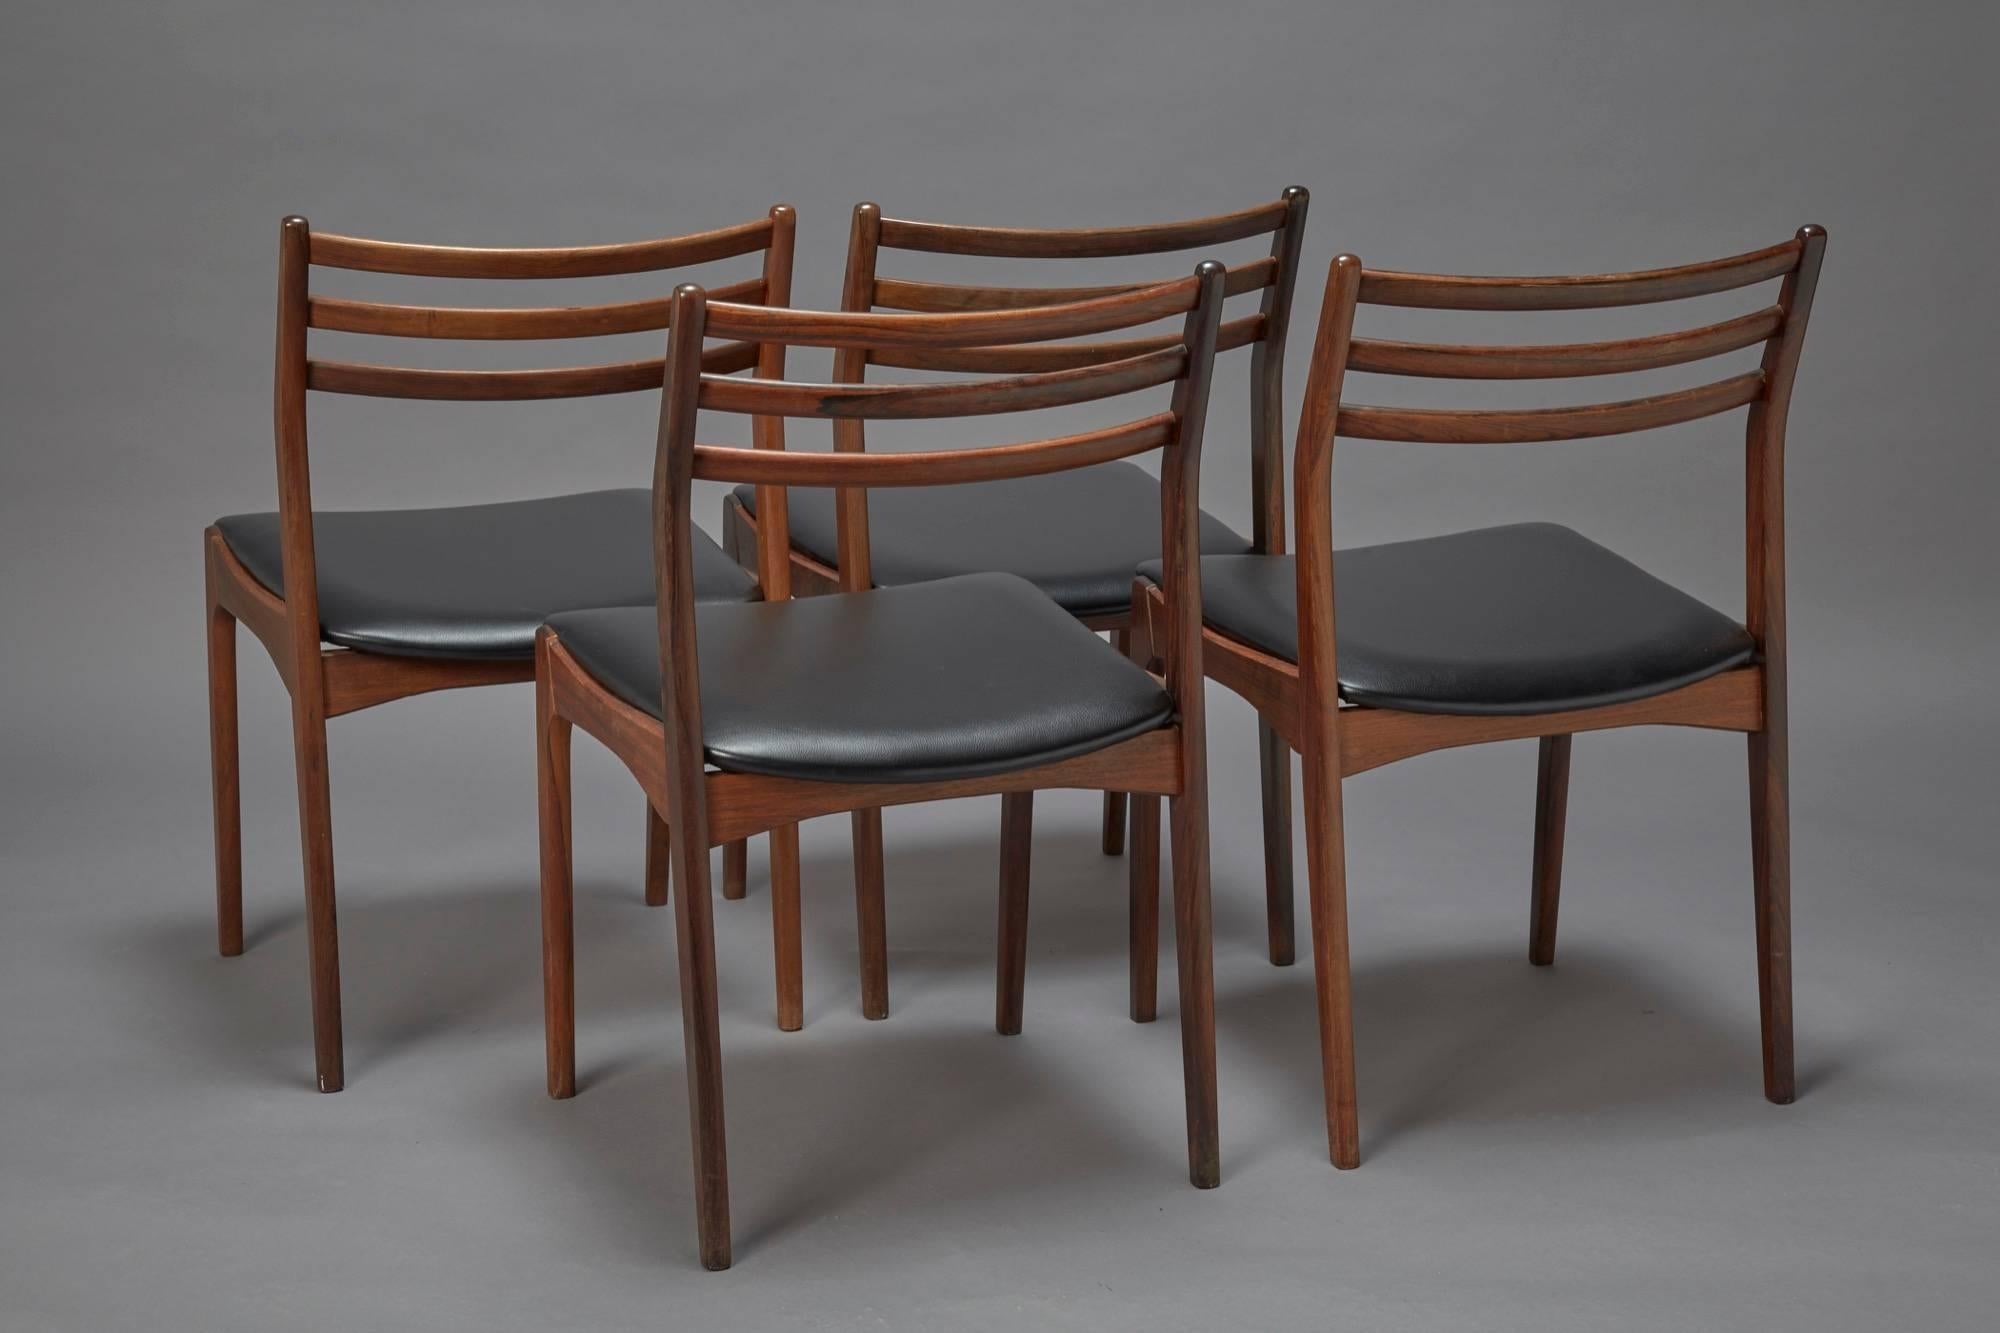 A set of four rosewood dining chairs by Niels Otto Møller similar to his model 78 design, Denmark. Reupholstered in black faux leather, excellent condition.
 